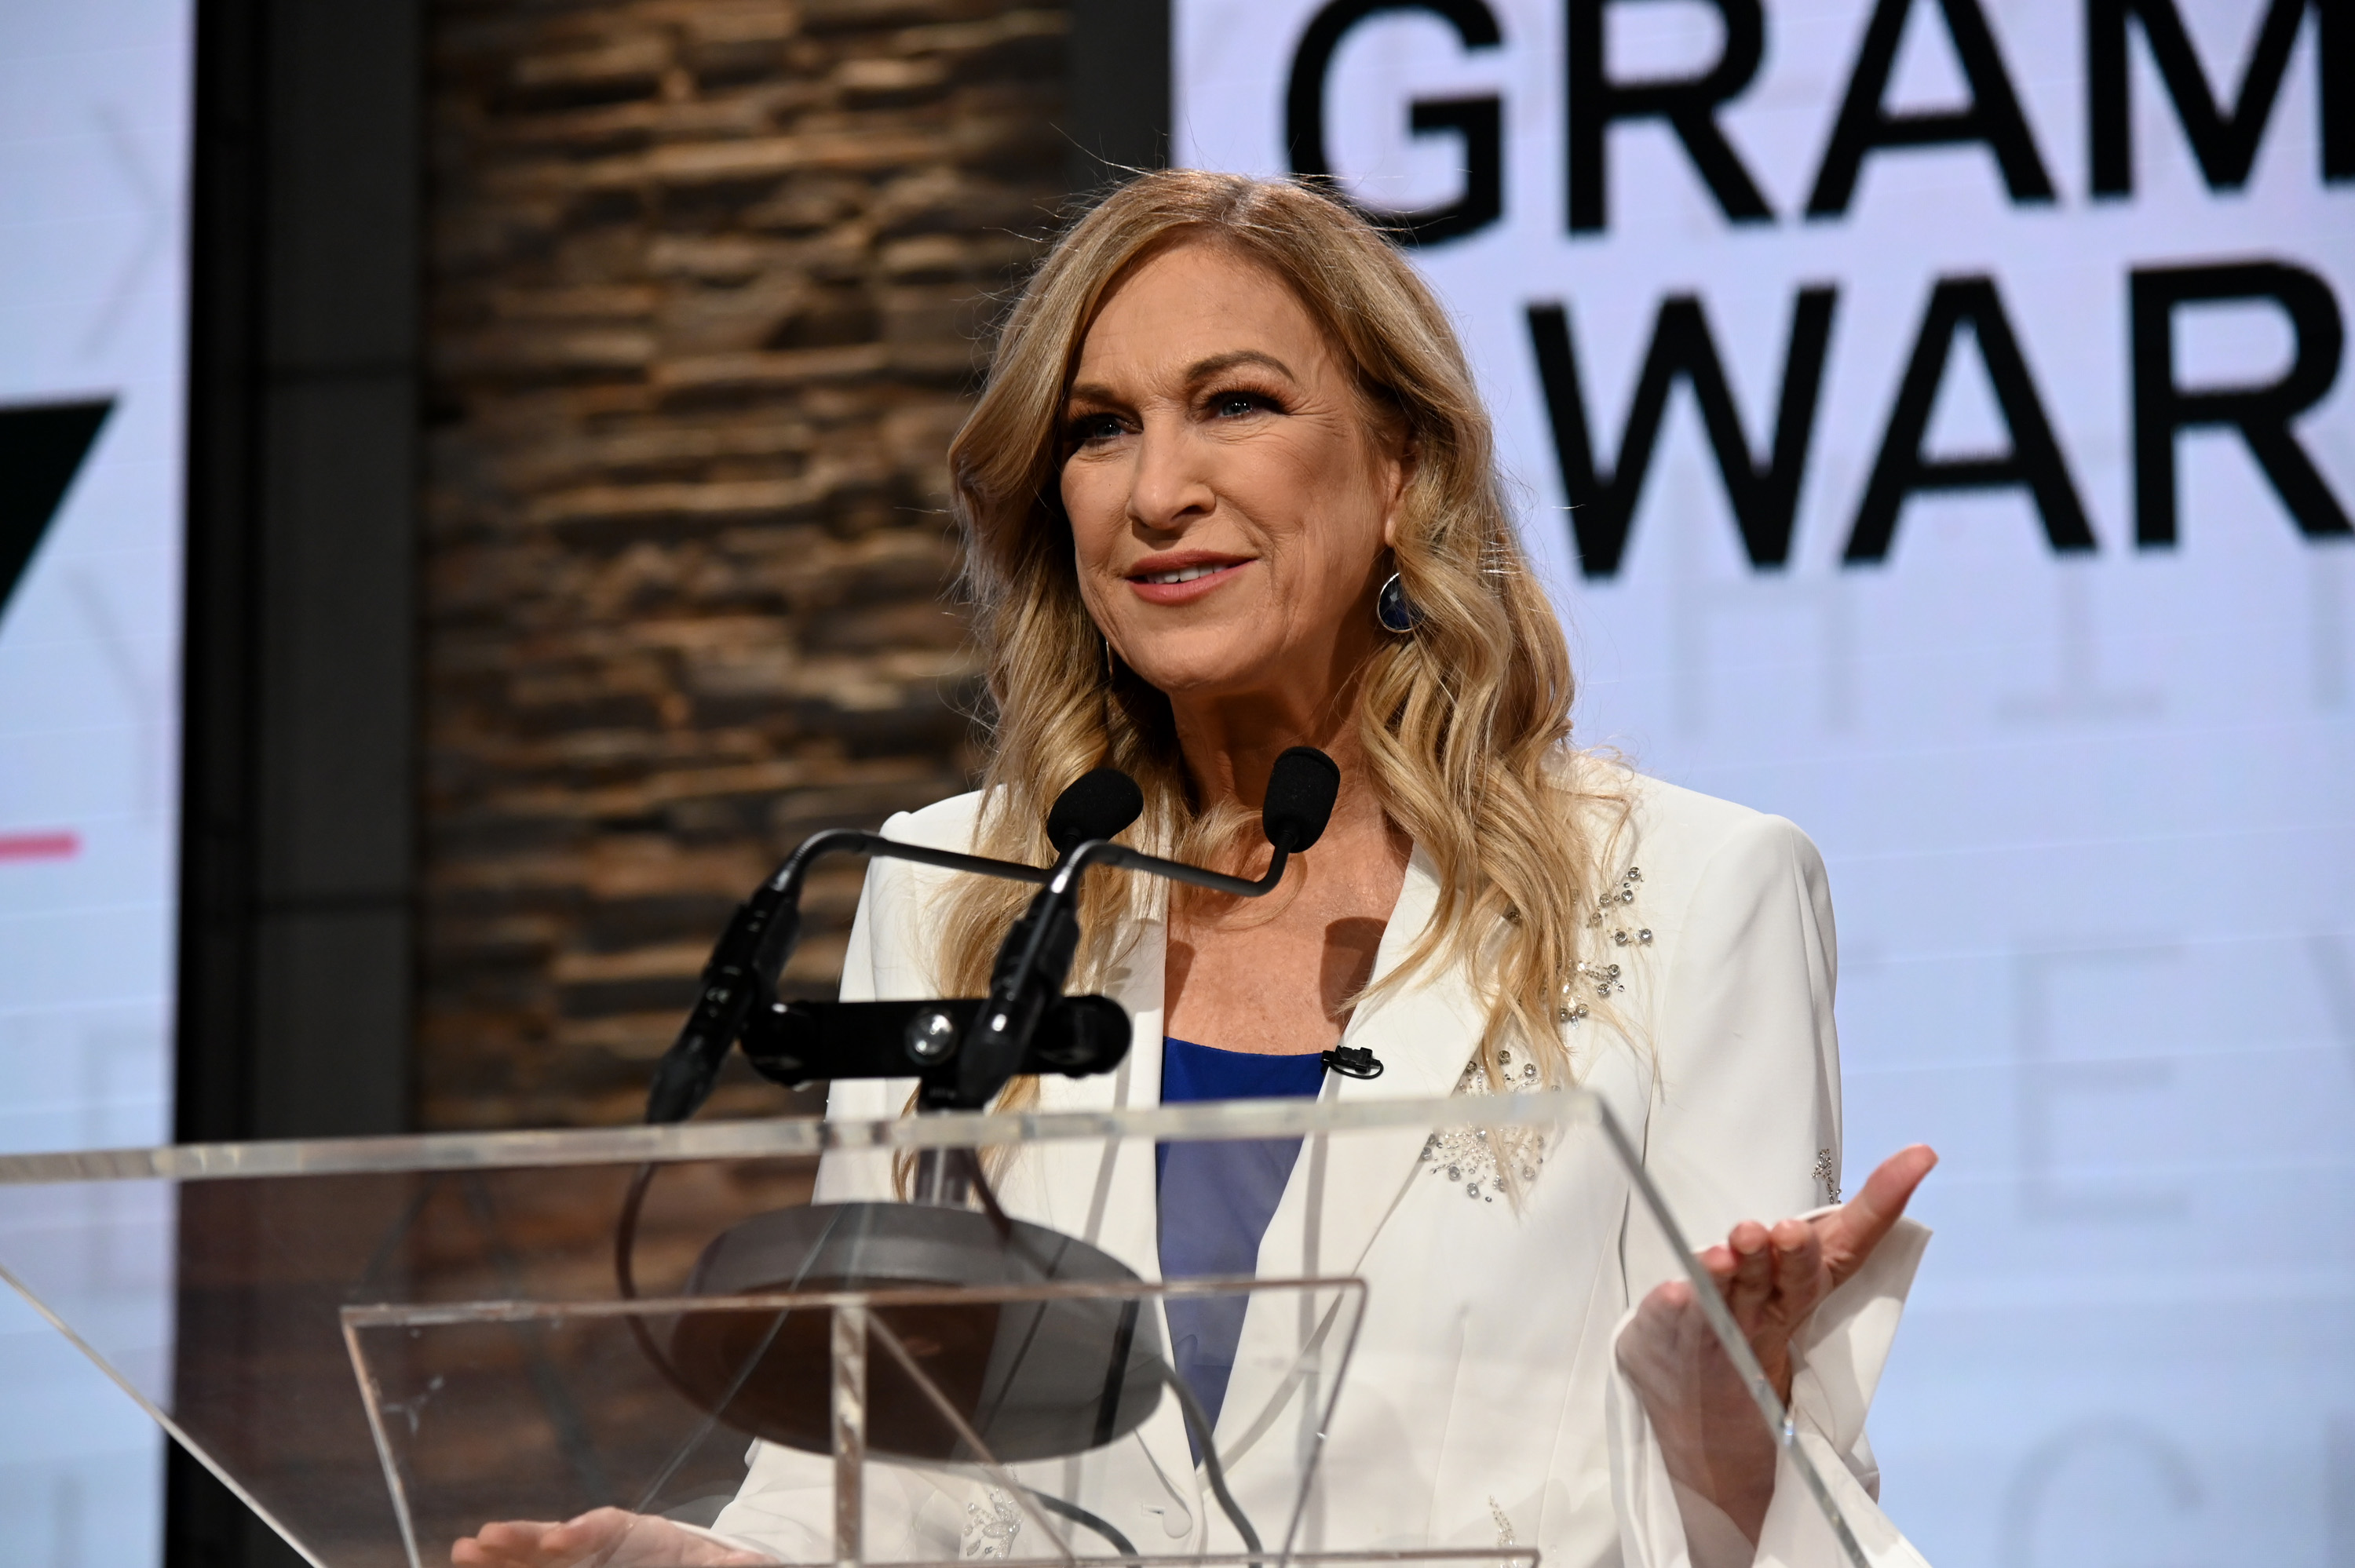 Recording Academy president and CEO Deborah Dugan and Chair speaks onstage at the GRAMMY Nominations Press Conference at CBS Studios on November 20, 2019 in New York City. (Photo by Bryan Bedder/Getty Images)